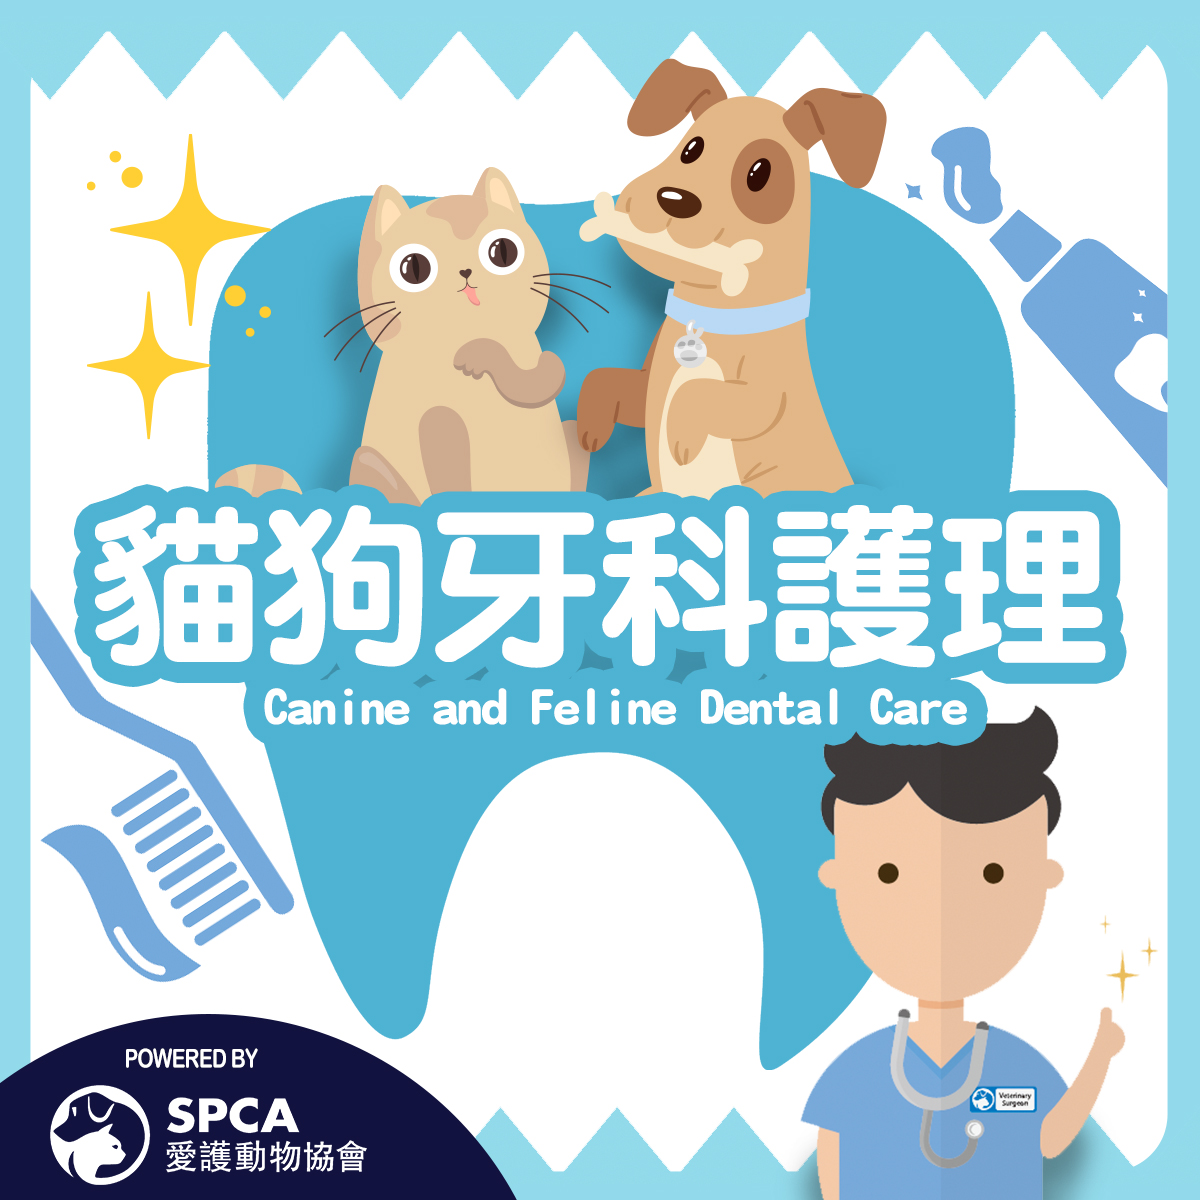 Canine and Feline Dental Care ｜ Let’s Talk about Teeth!